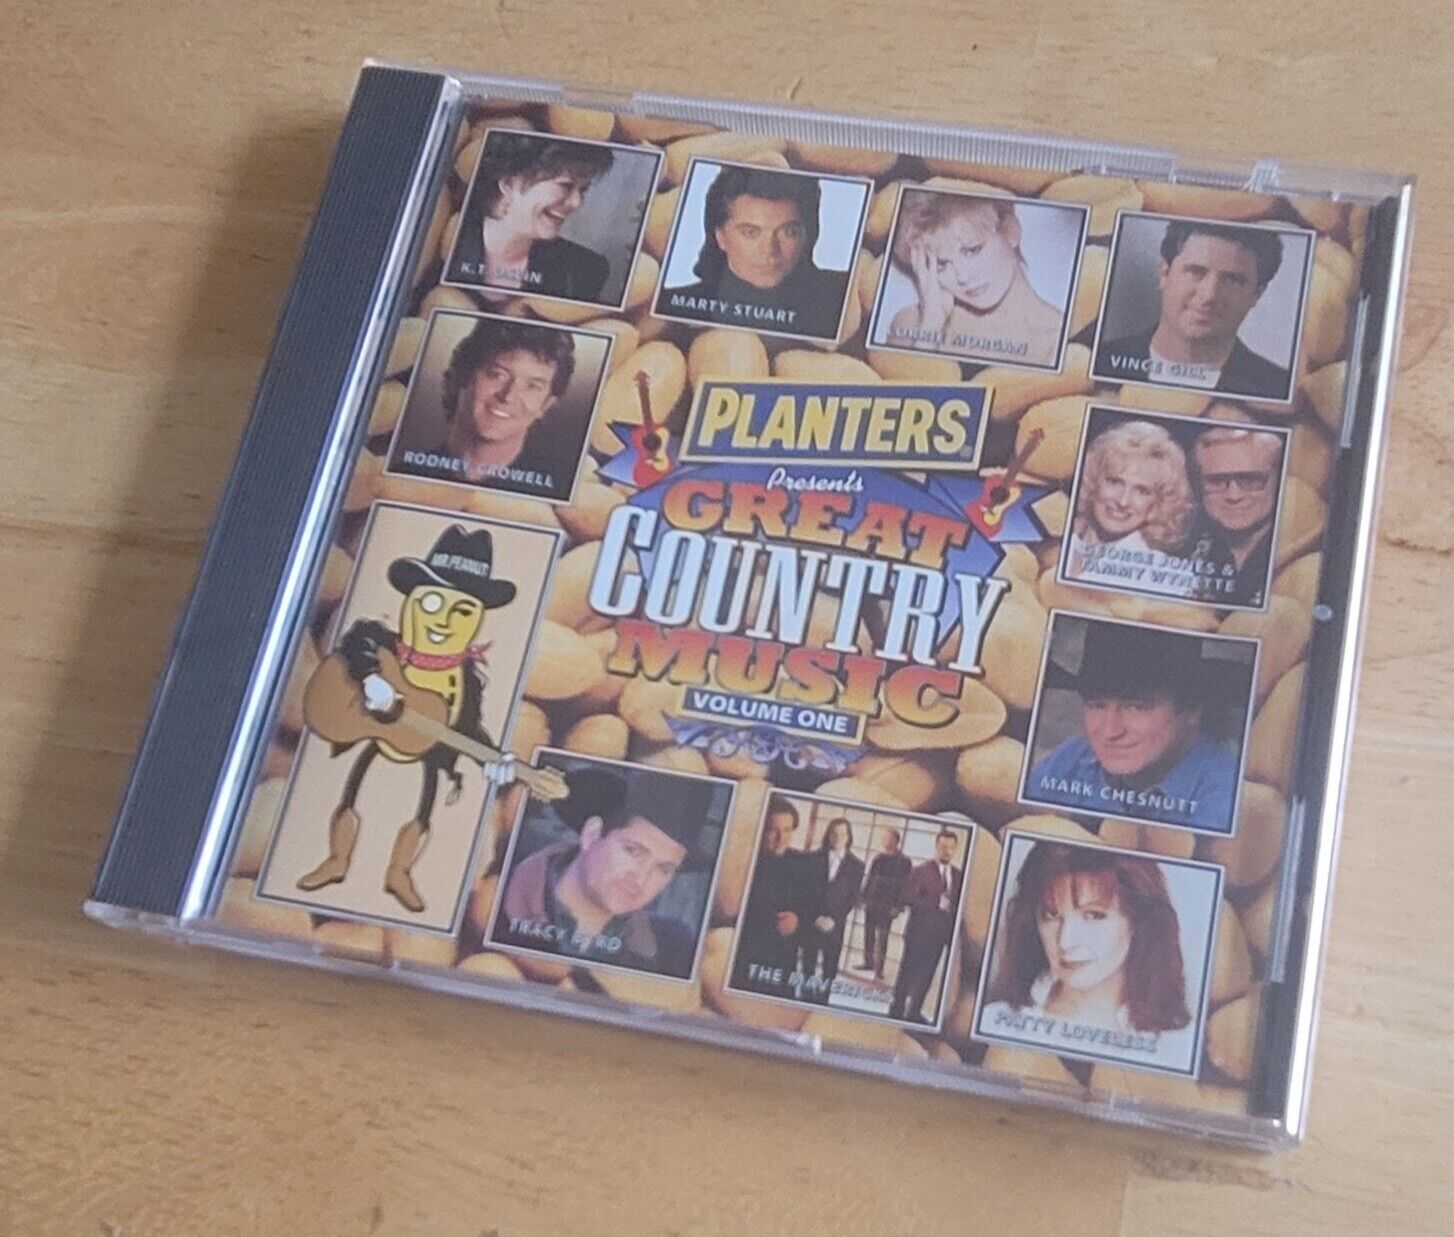 RARE - Planters Peanuts Presents - Great Country Music Volume 1 - CD